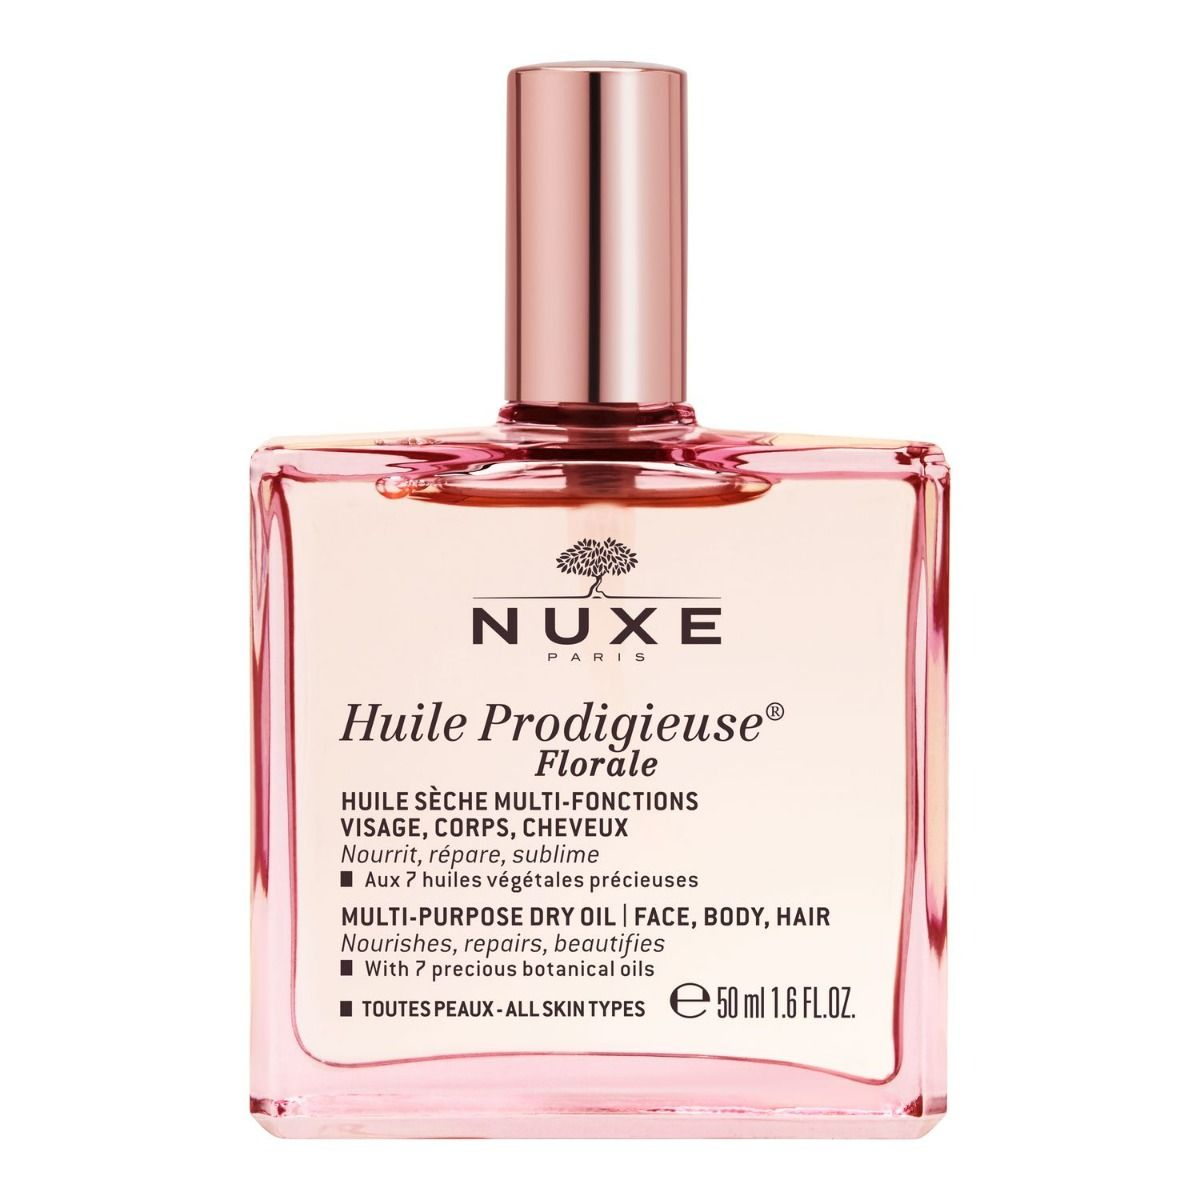 Nuxe Huile Prodigieuse Florale масло для лица, тела и волос, 50 ml nuxe масло huile prodigieuse florale цветочное сухое 50 мл